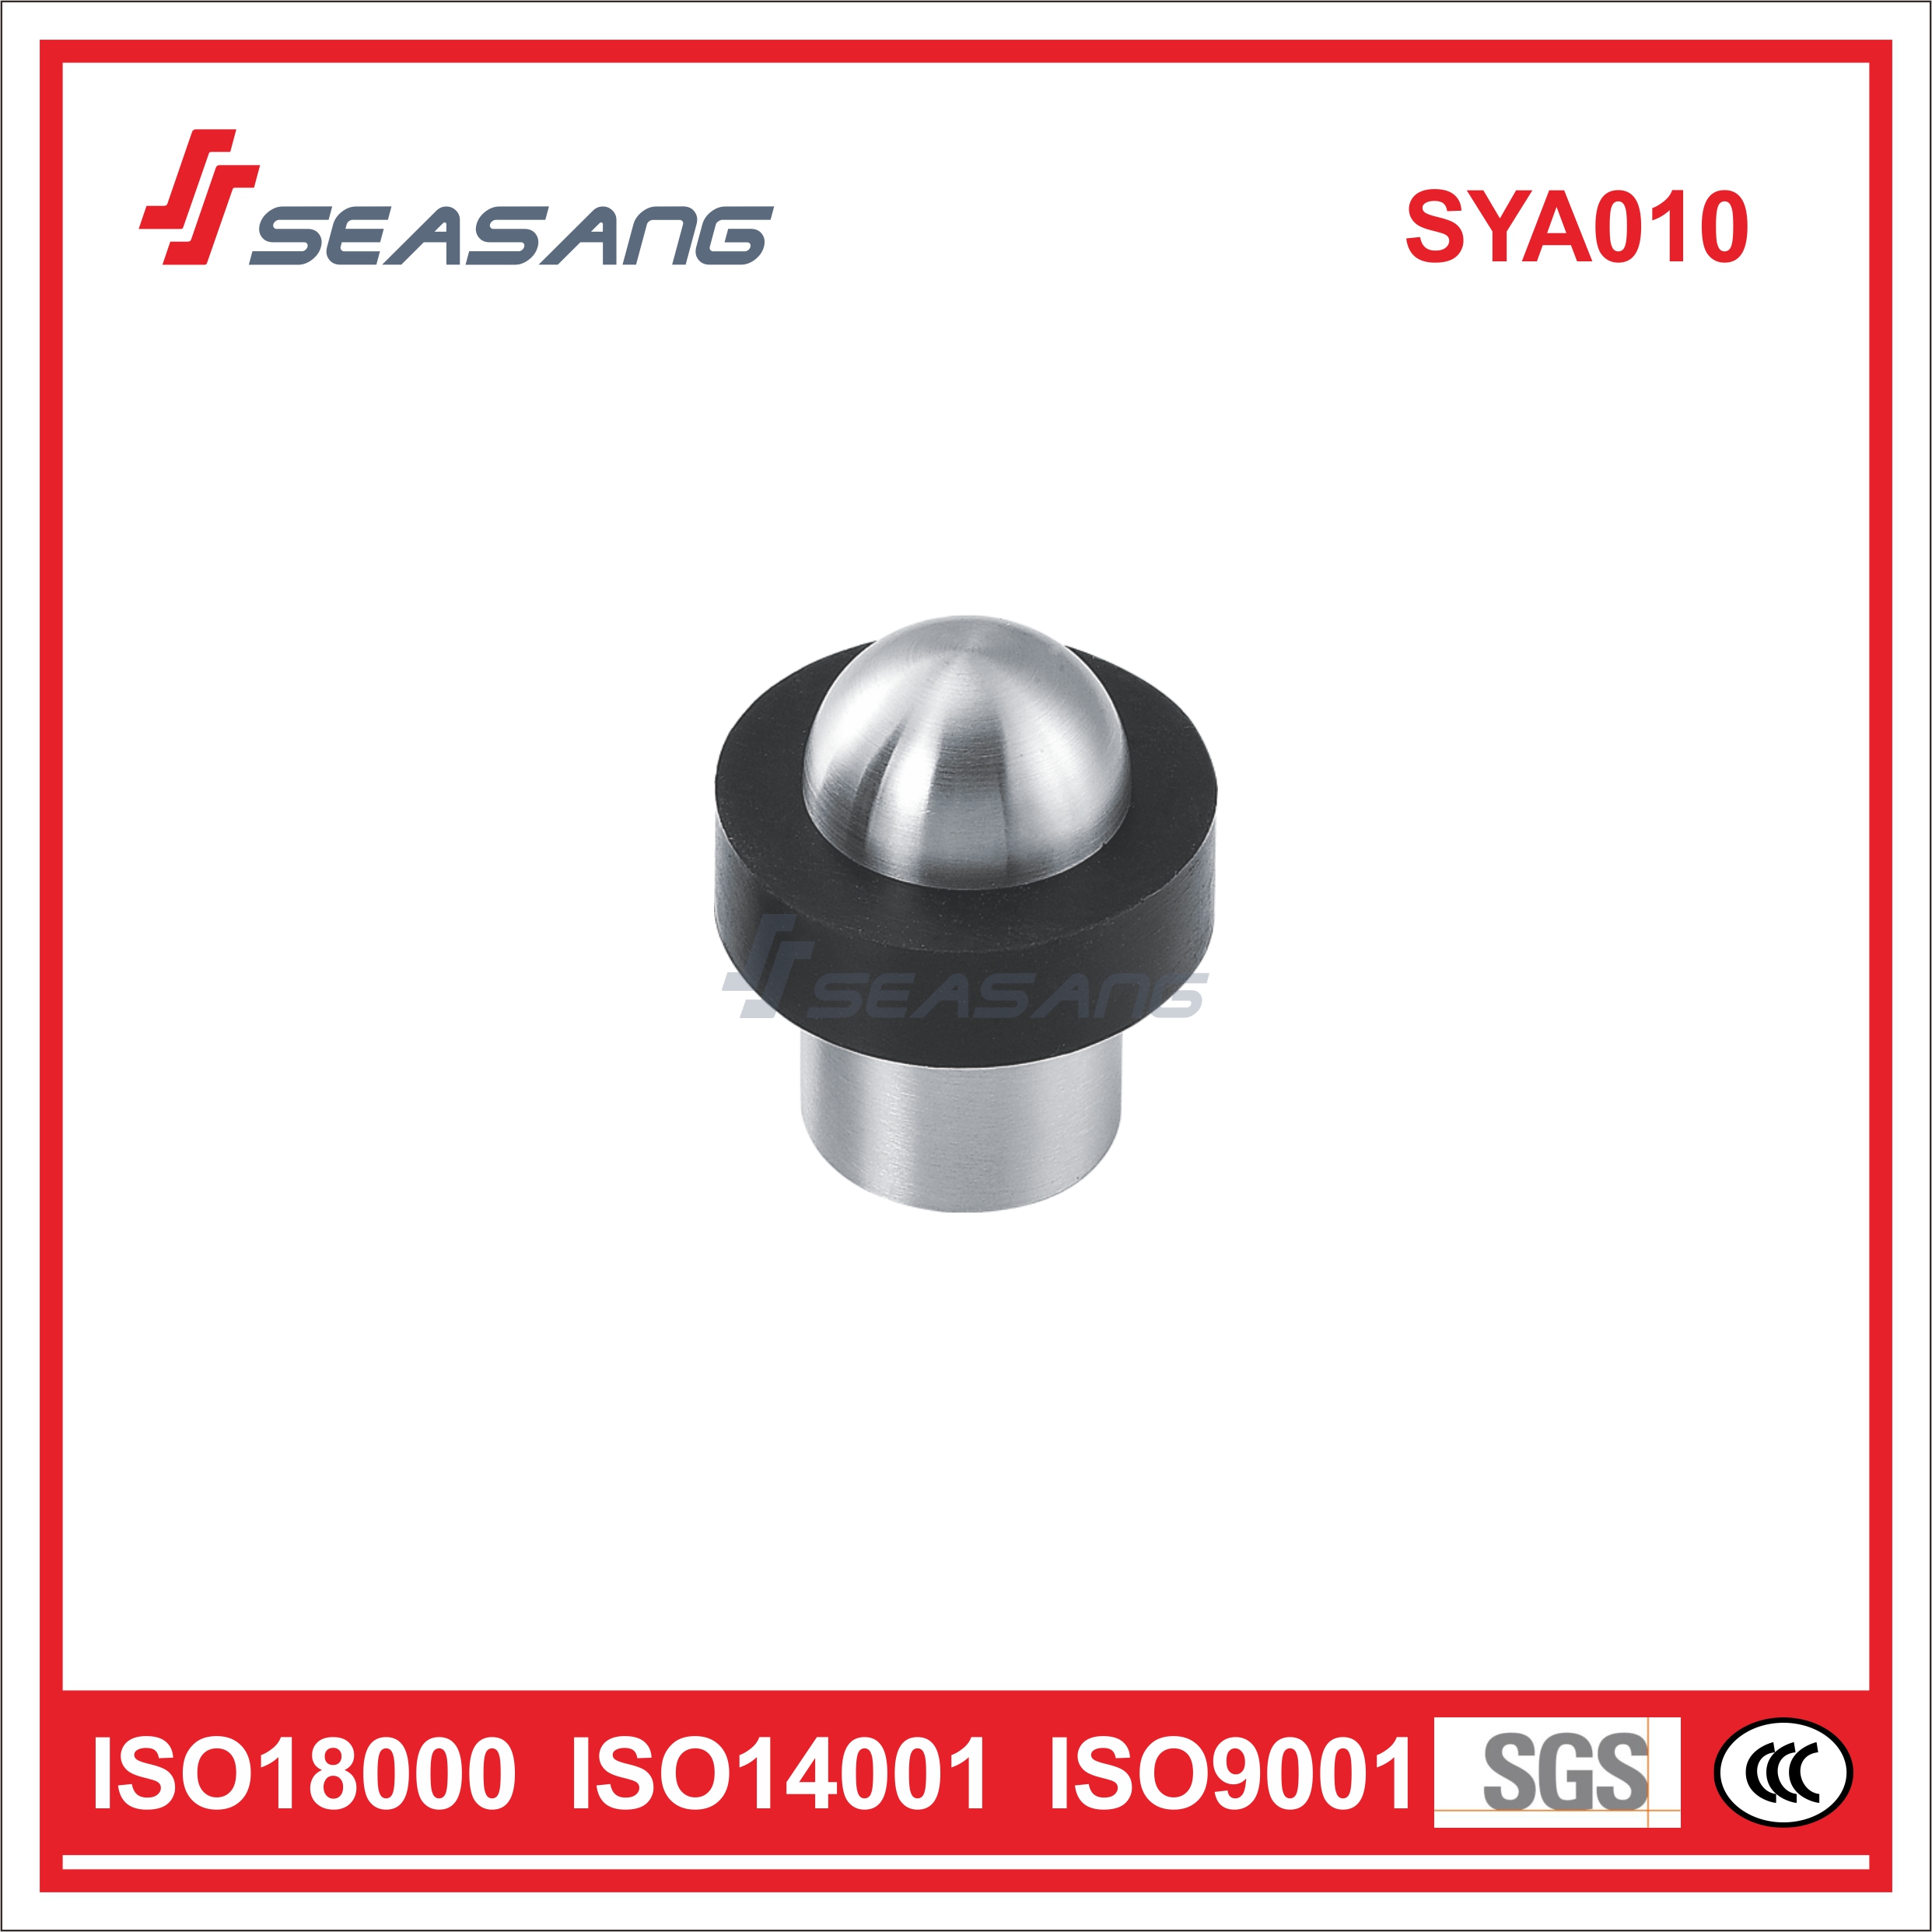 High Quality Stainless Steel Door Stop, Sya010